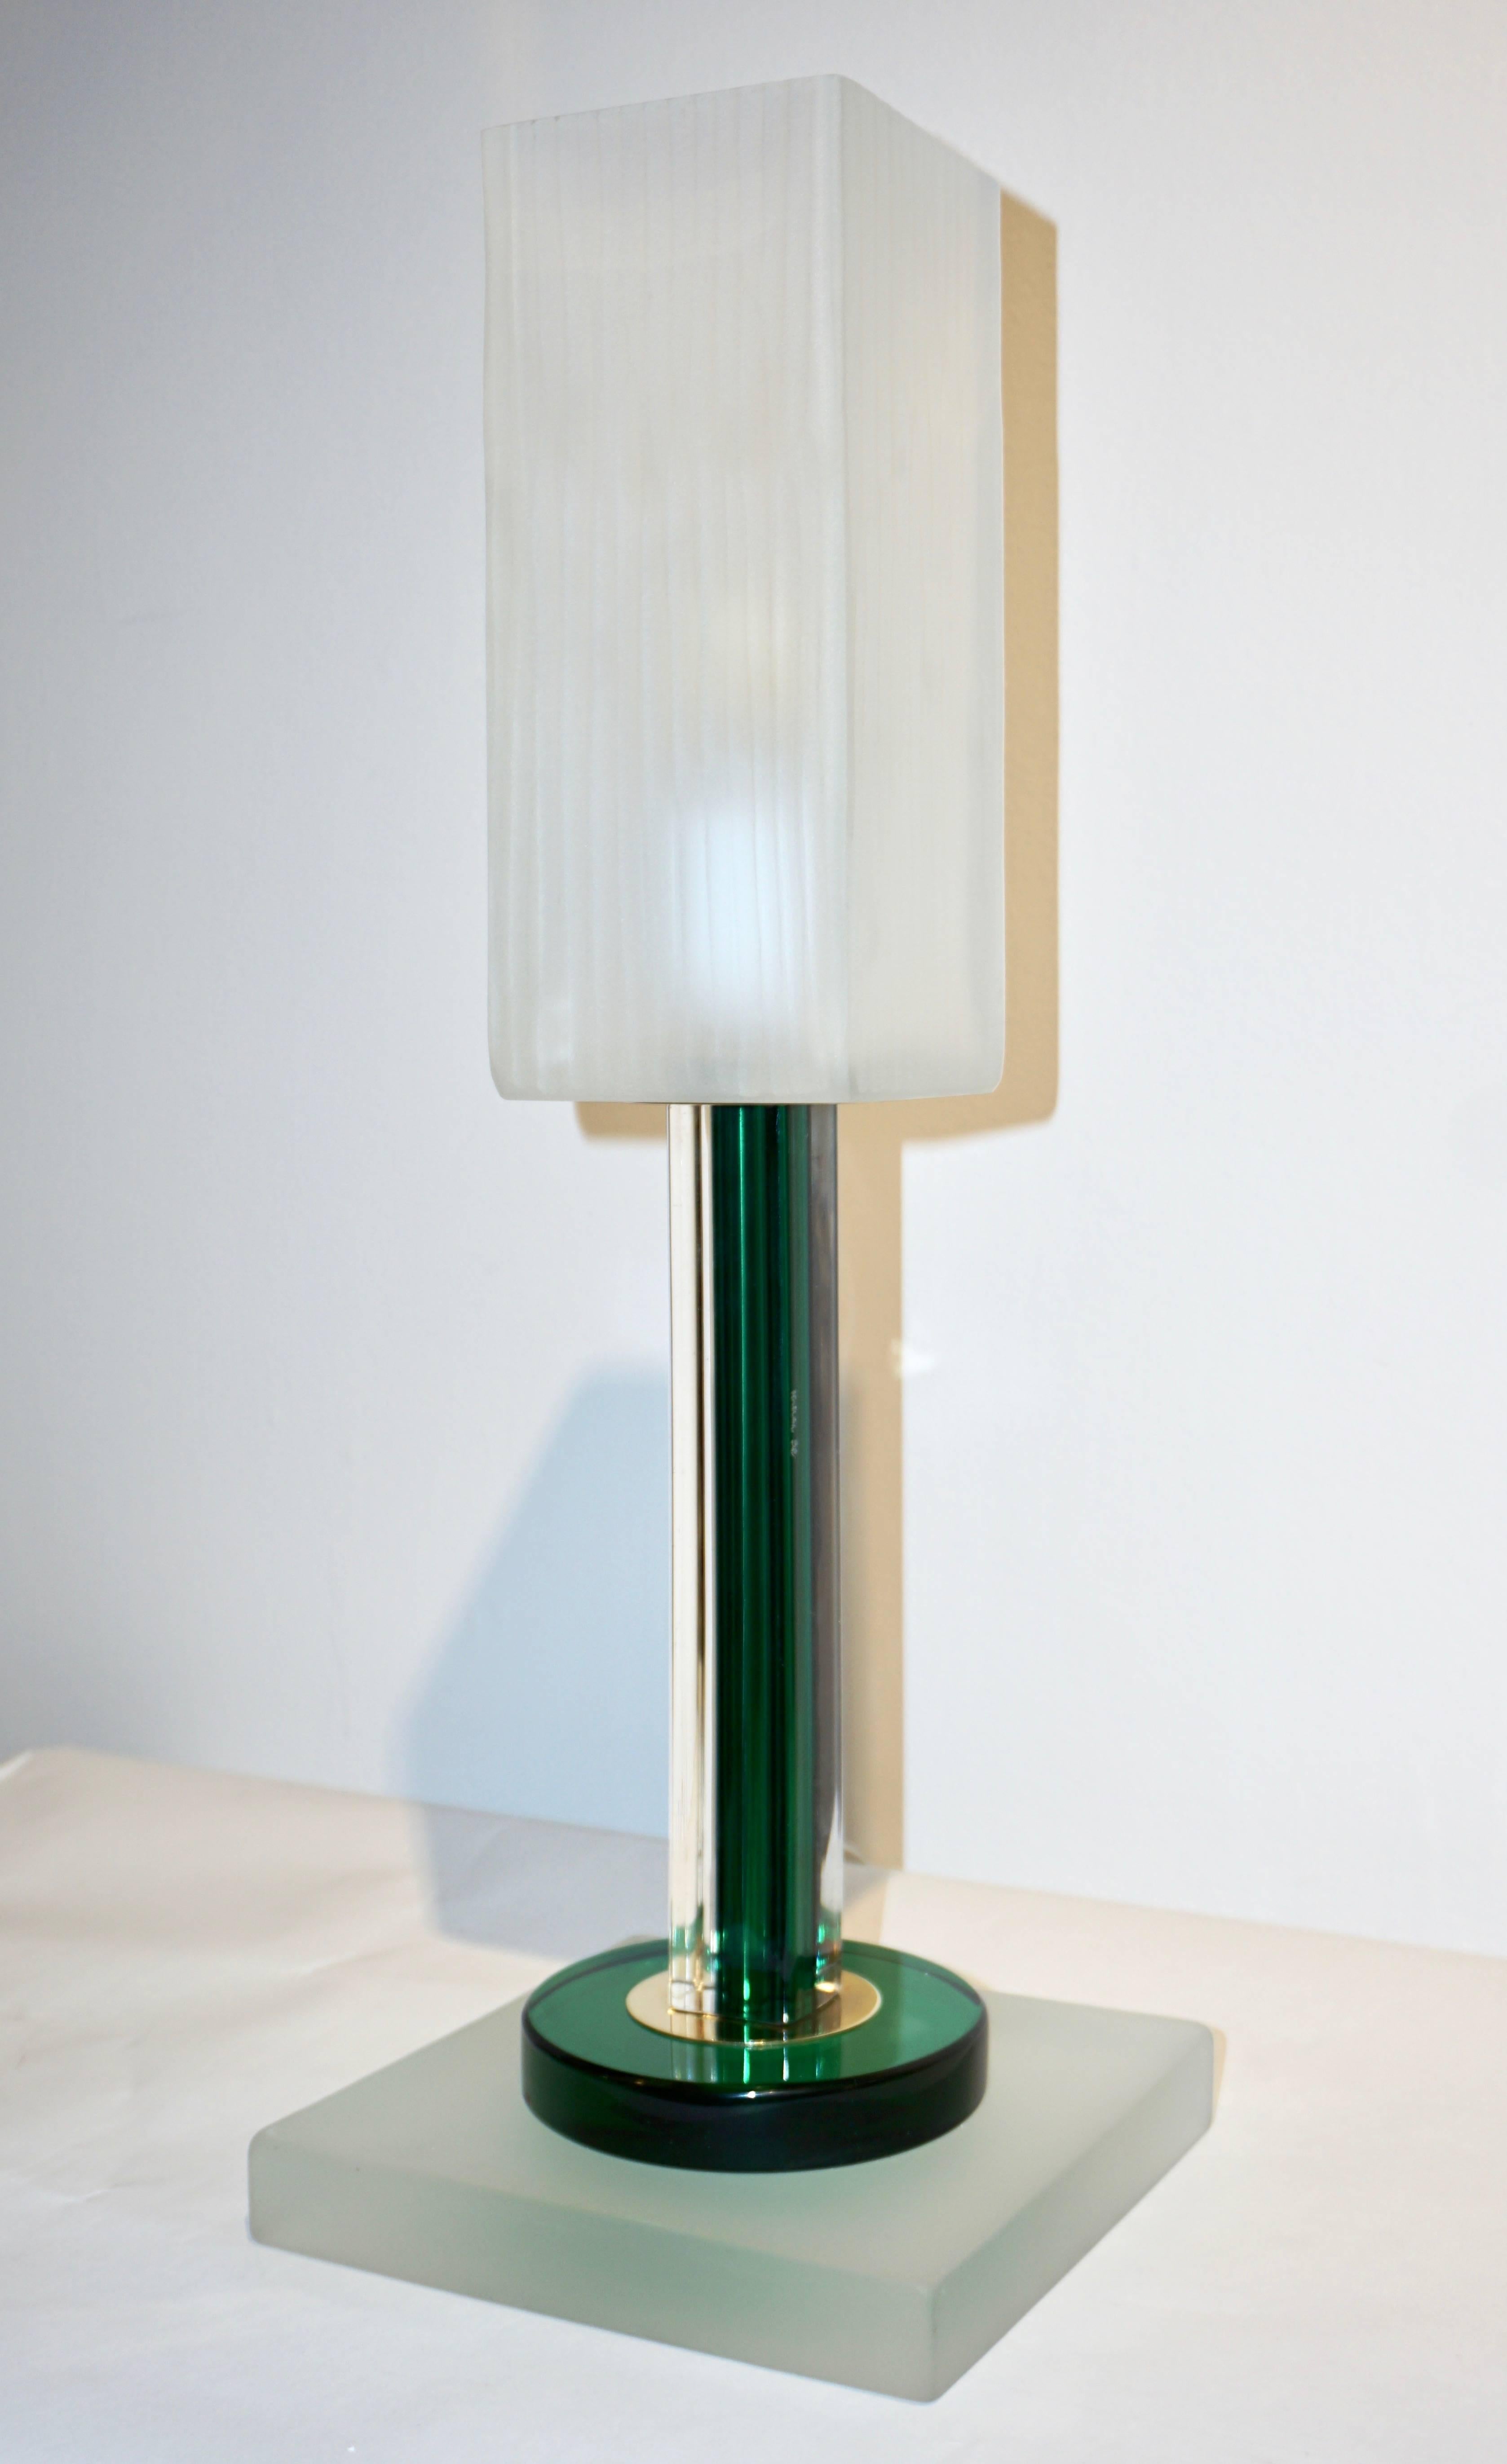 Art Glass Venini Vintage Green Pair of Table Lamps with White Frosted Murano Glass Shades